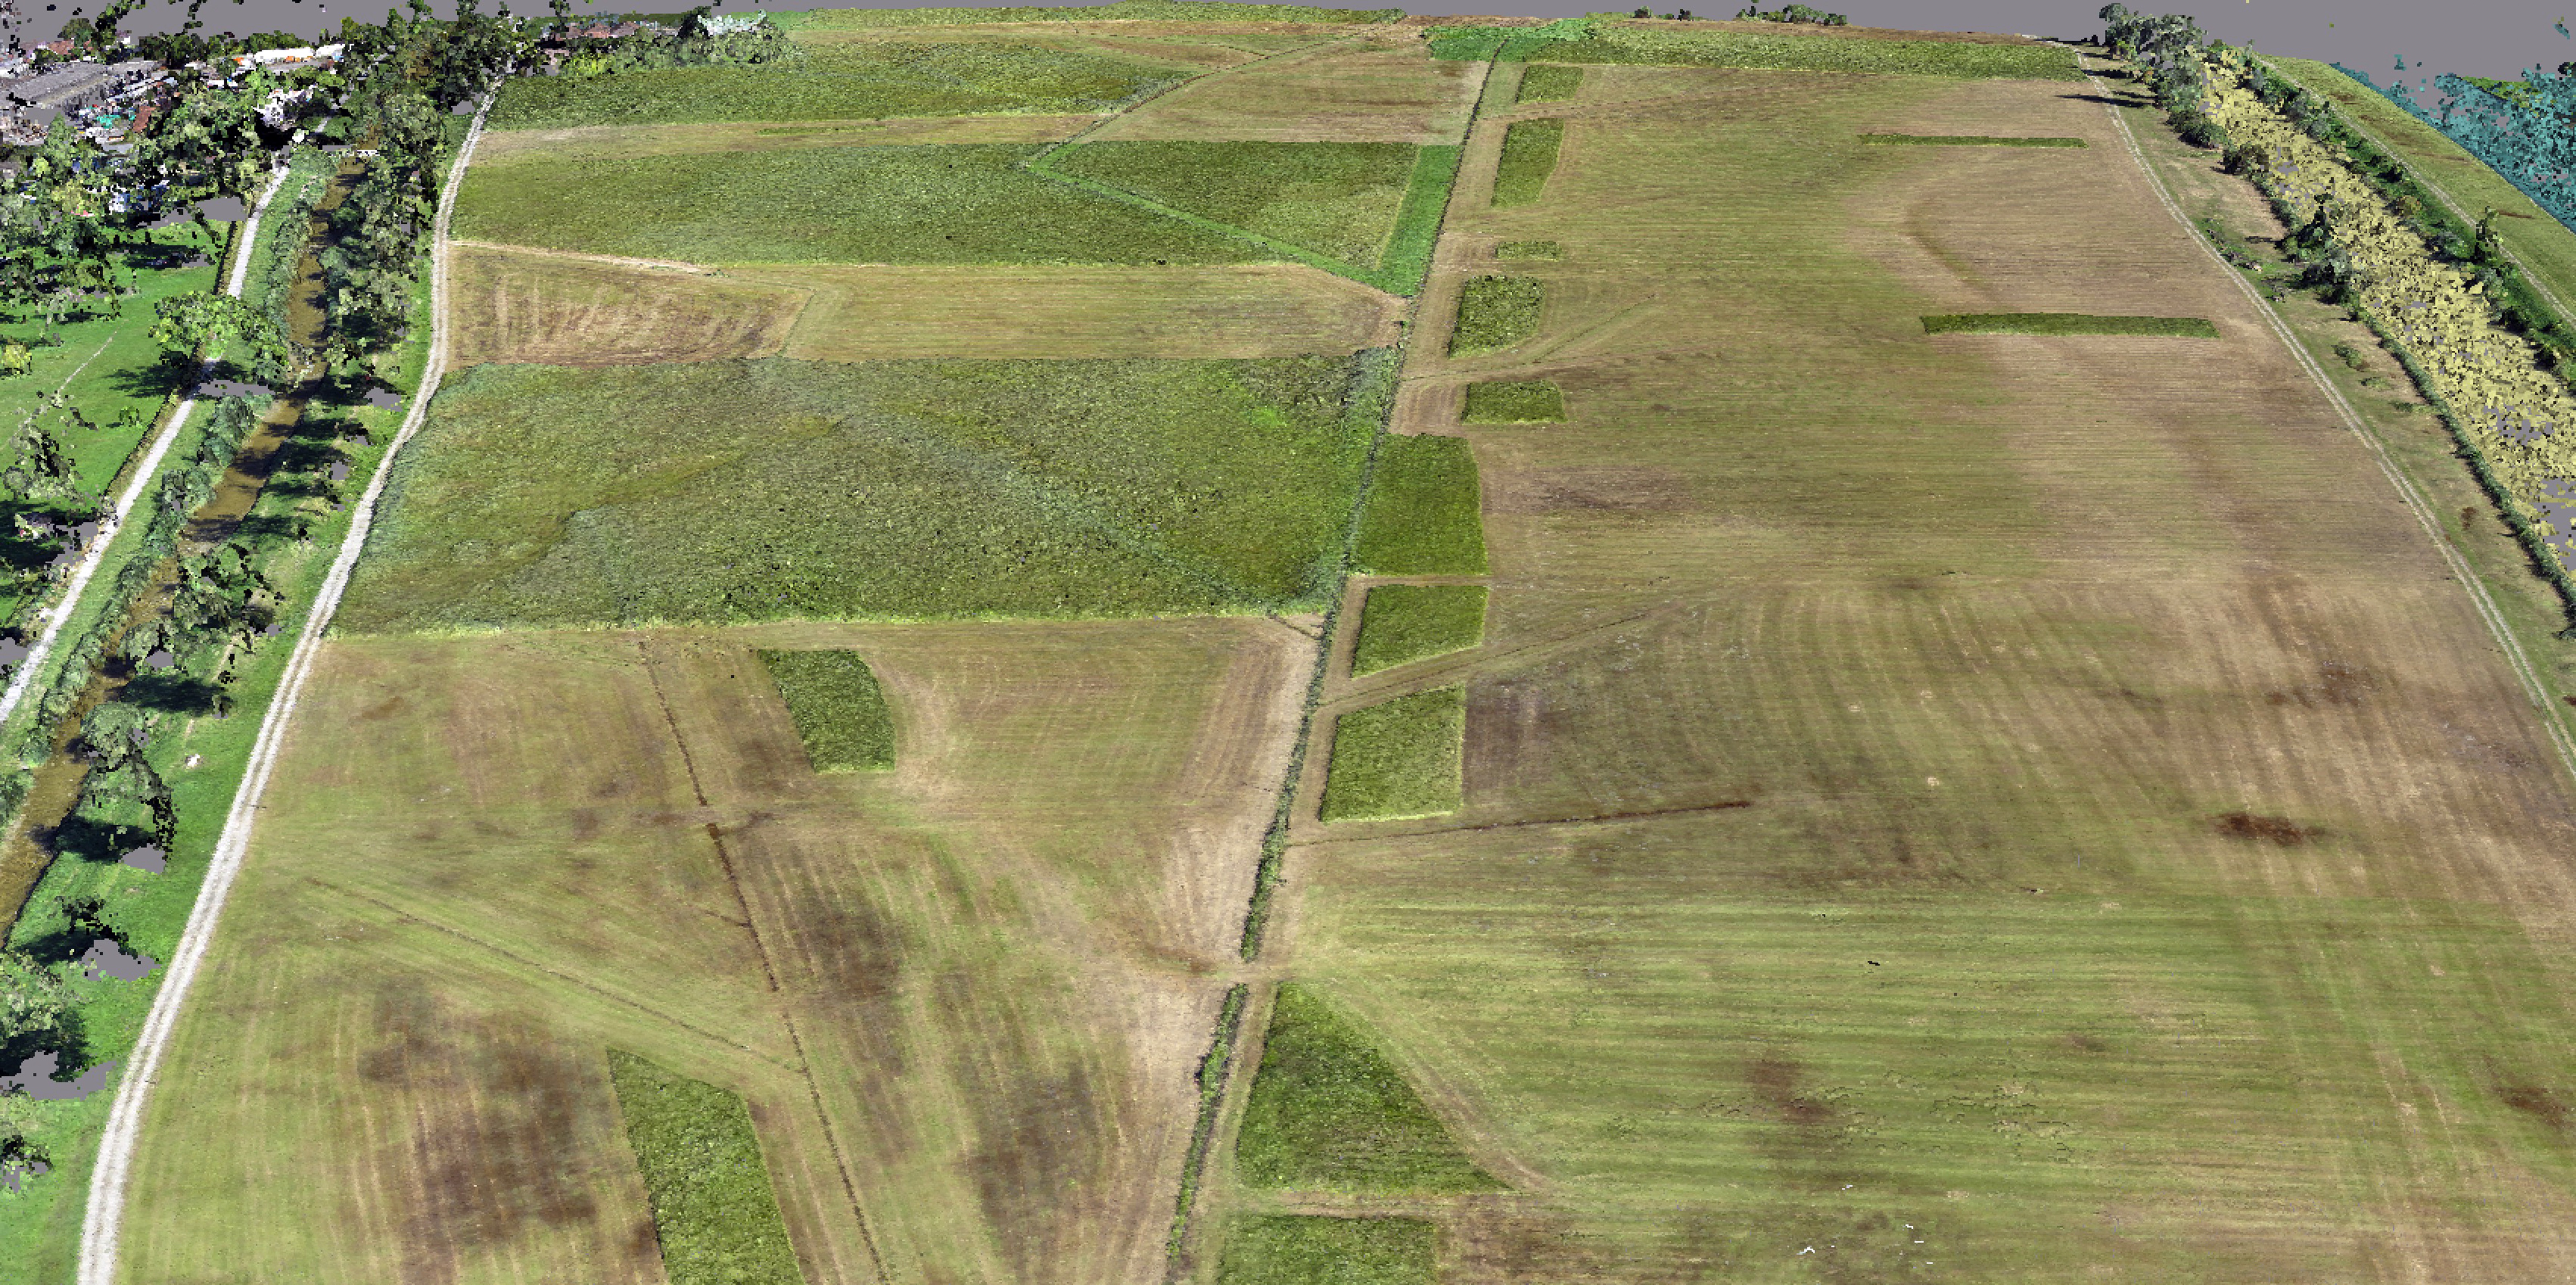 NL30: The Aerial Gaze: Iterative Aerial Site Scanning for Landscape Analysis, Planning, and Design